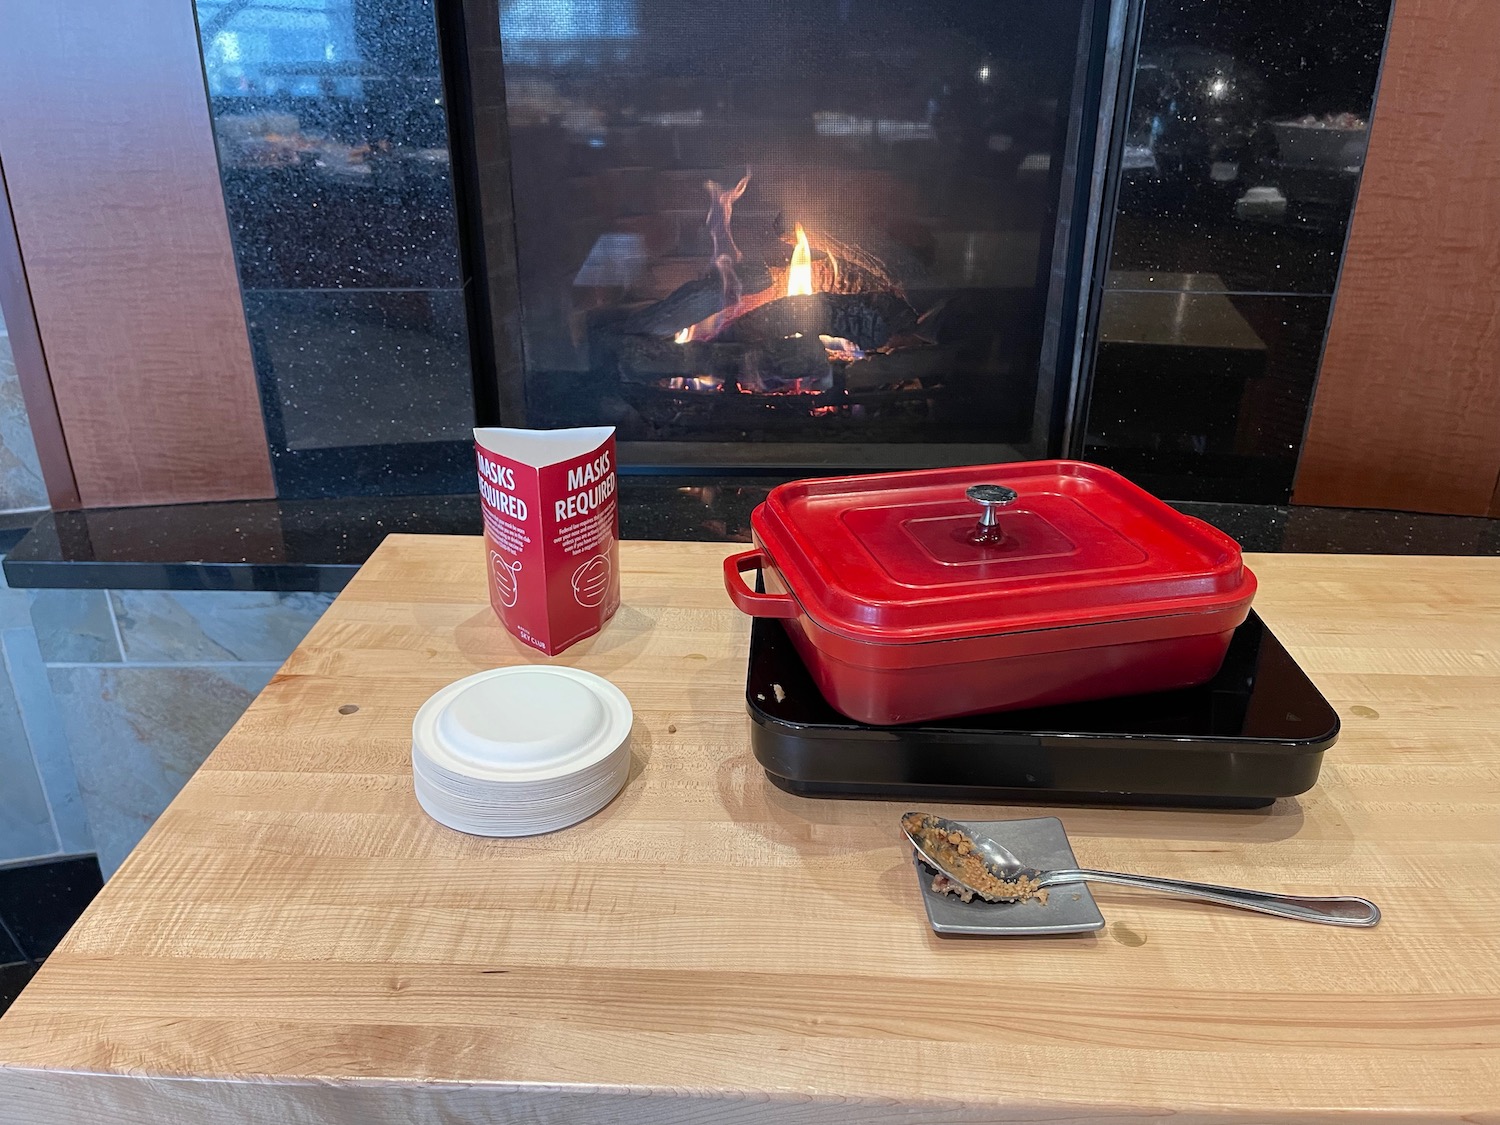 a red pan on a table next to a red container